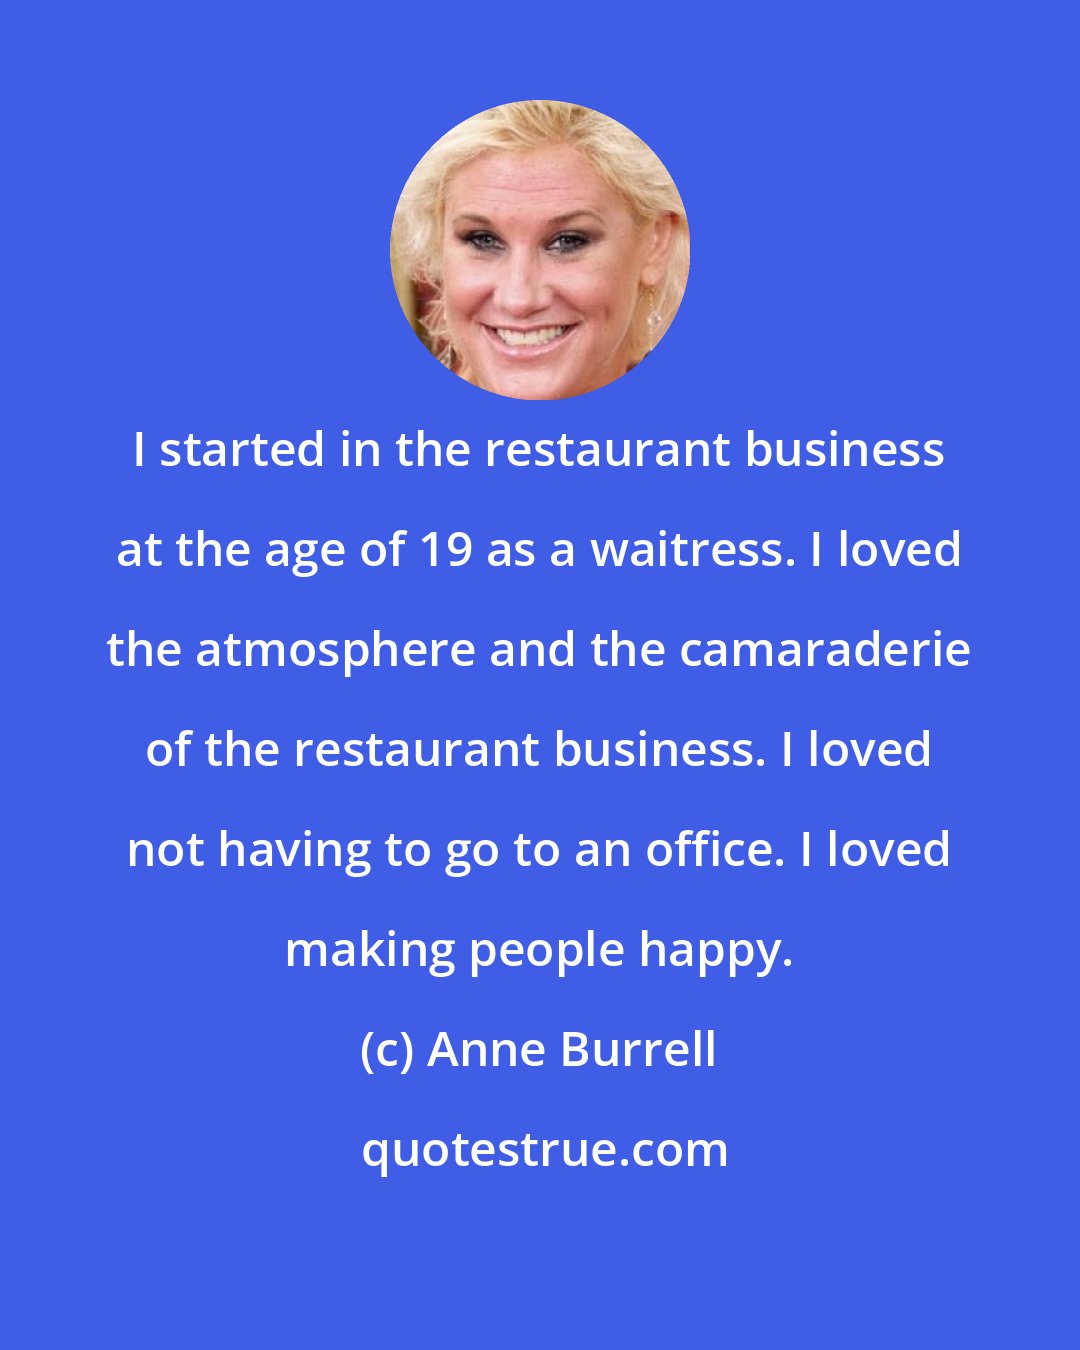 Anne Burrell: I started in the restaurant business at the age of 19 as a waitress. I loved the atmosphere and the camaraderie of the restaurant business. I loved not having to go to an office. I loved making people happy.